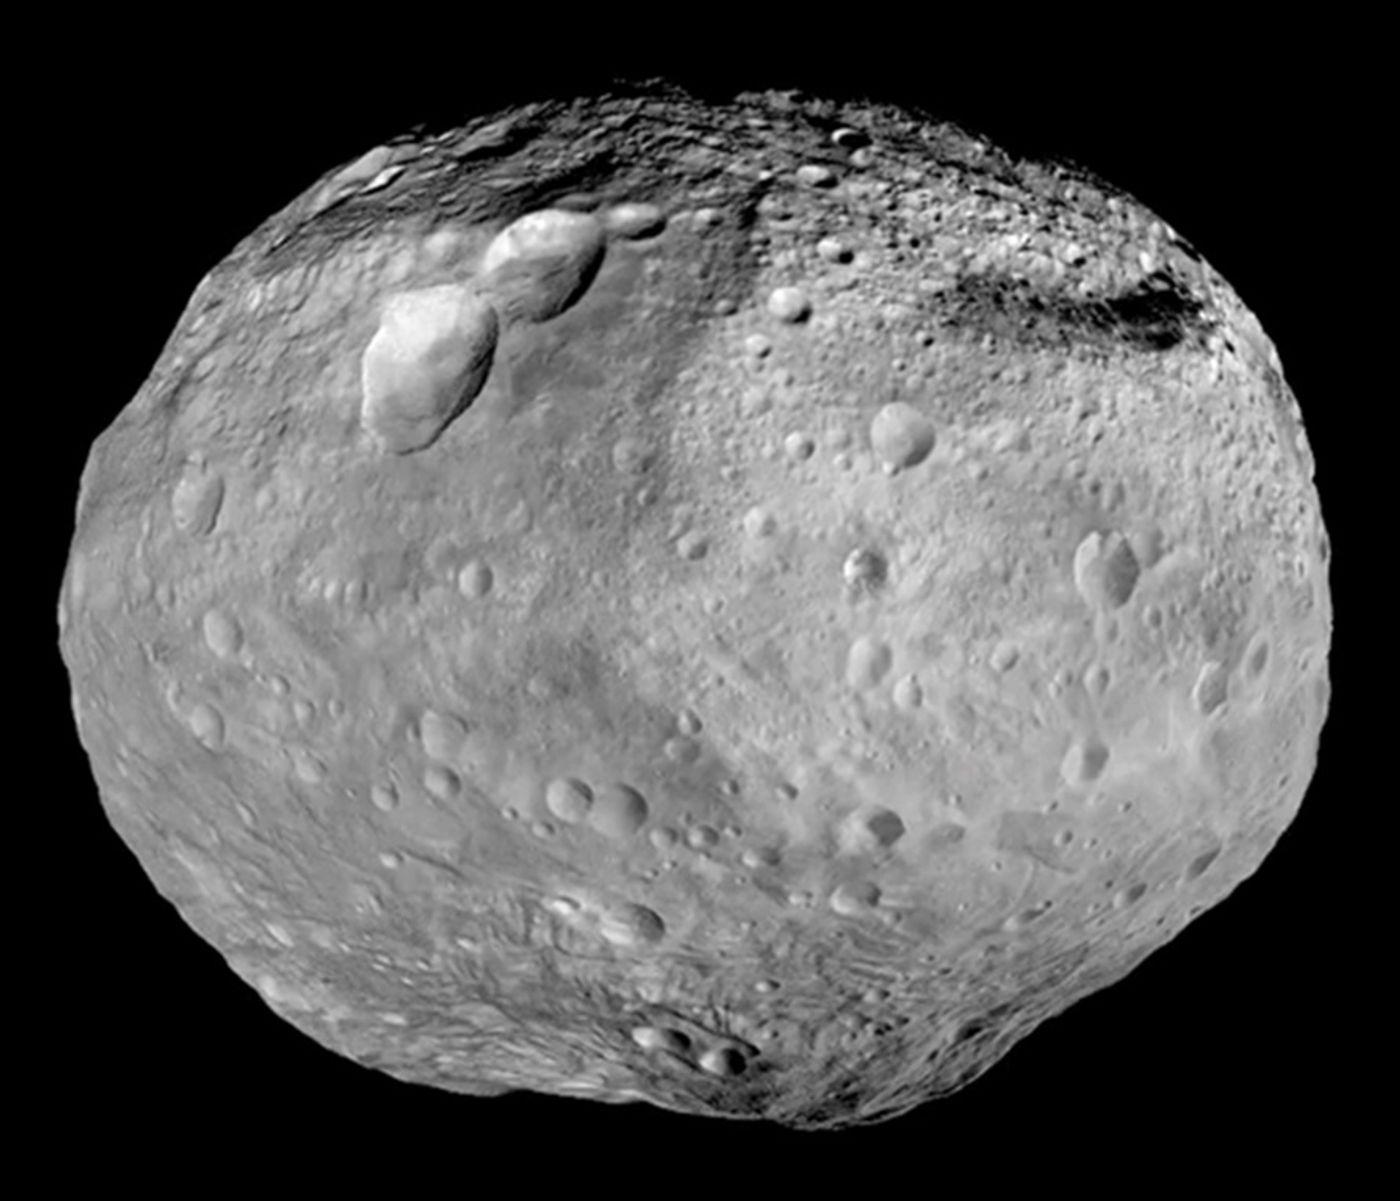 The asteroid Vesta is one thought to contain water